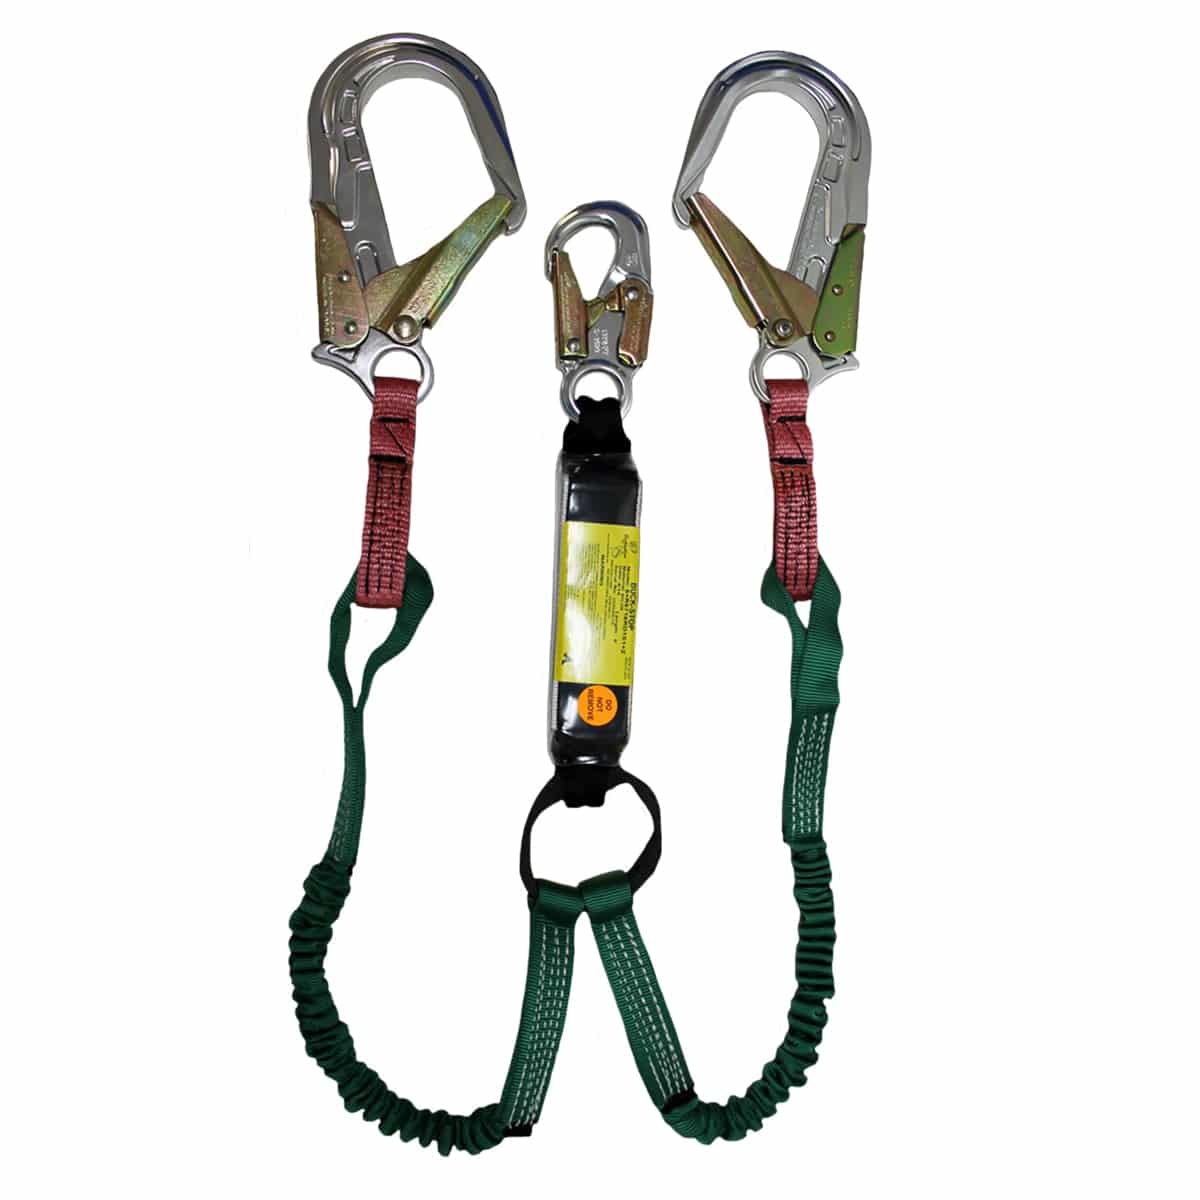 The Lightweight Y Lanyard - 5+R67D16RD1S1 / 5+R6716RD1S1